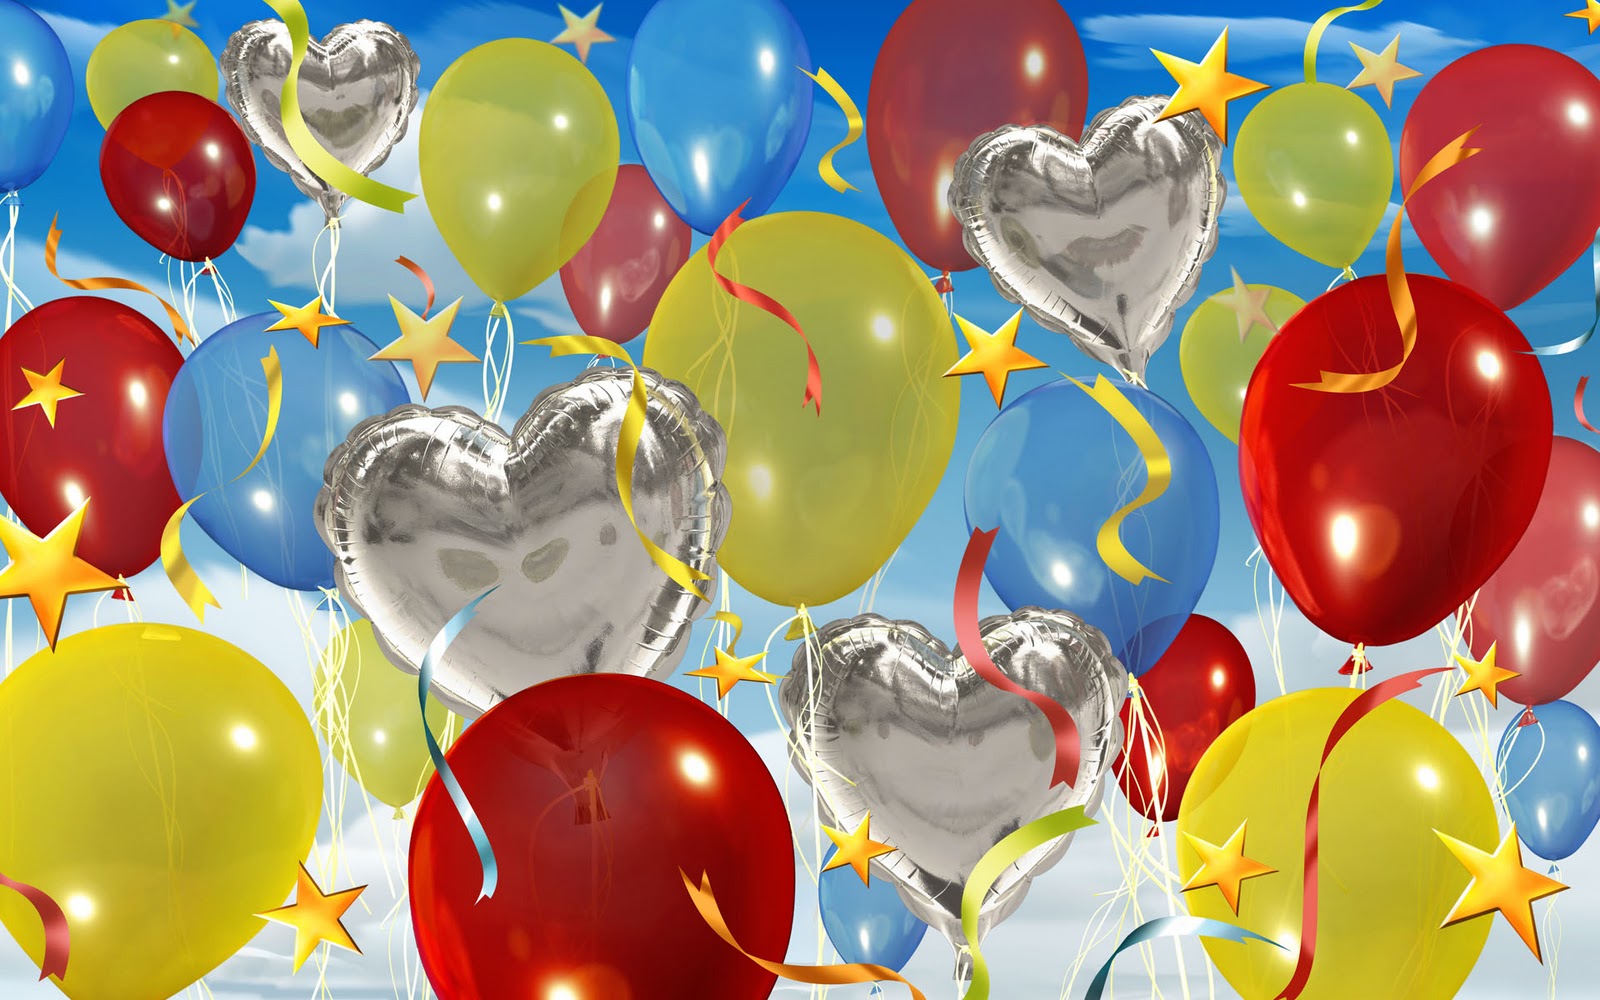 birthday balloons wallpaper,balloon,party supply,toy,colorfulness,heart